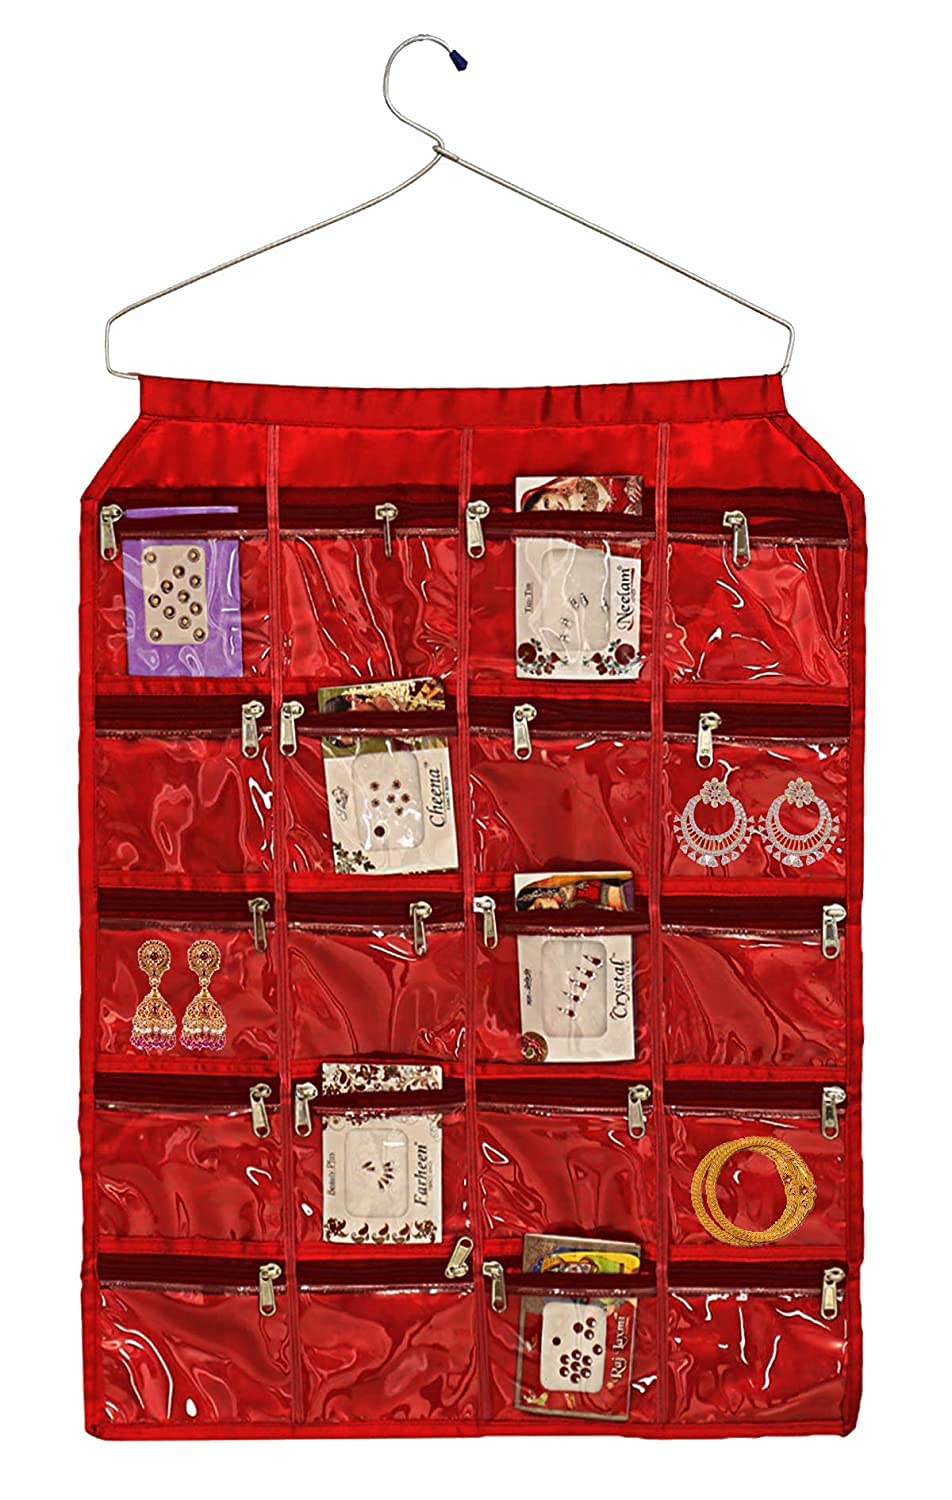 Kuber Industries Foldable Jewellery Organizer With 12 Tranapasrent Zippered Pockets For Storing Jewelry, Bracelets, Earrings, Hair Accessories, Rings etc (Maroon) -HS_38_KUBMART21039, Pack of 1